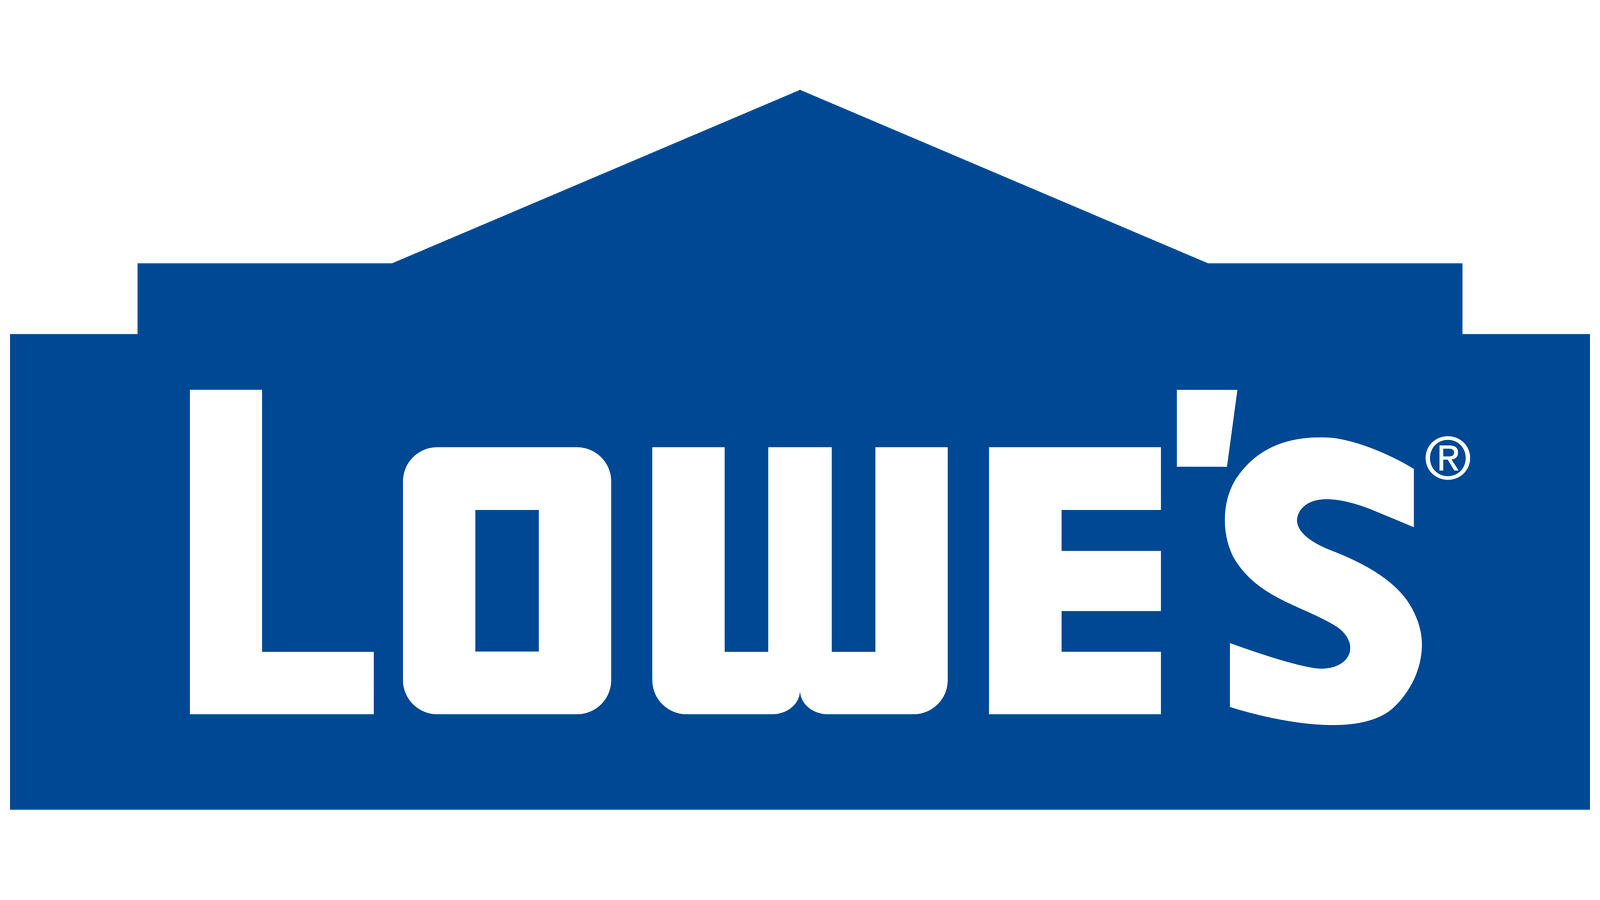  2022/01/Lowes-Logo.png 